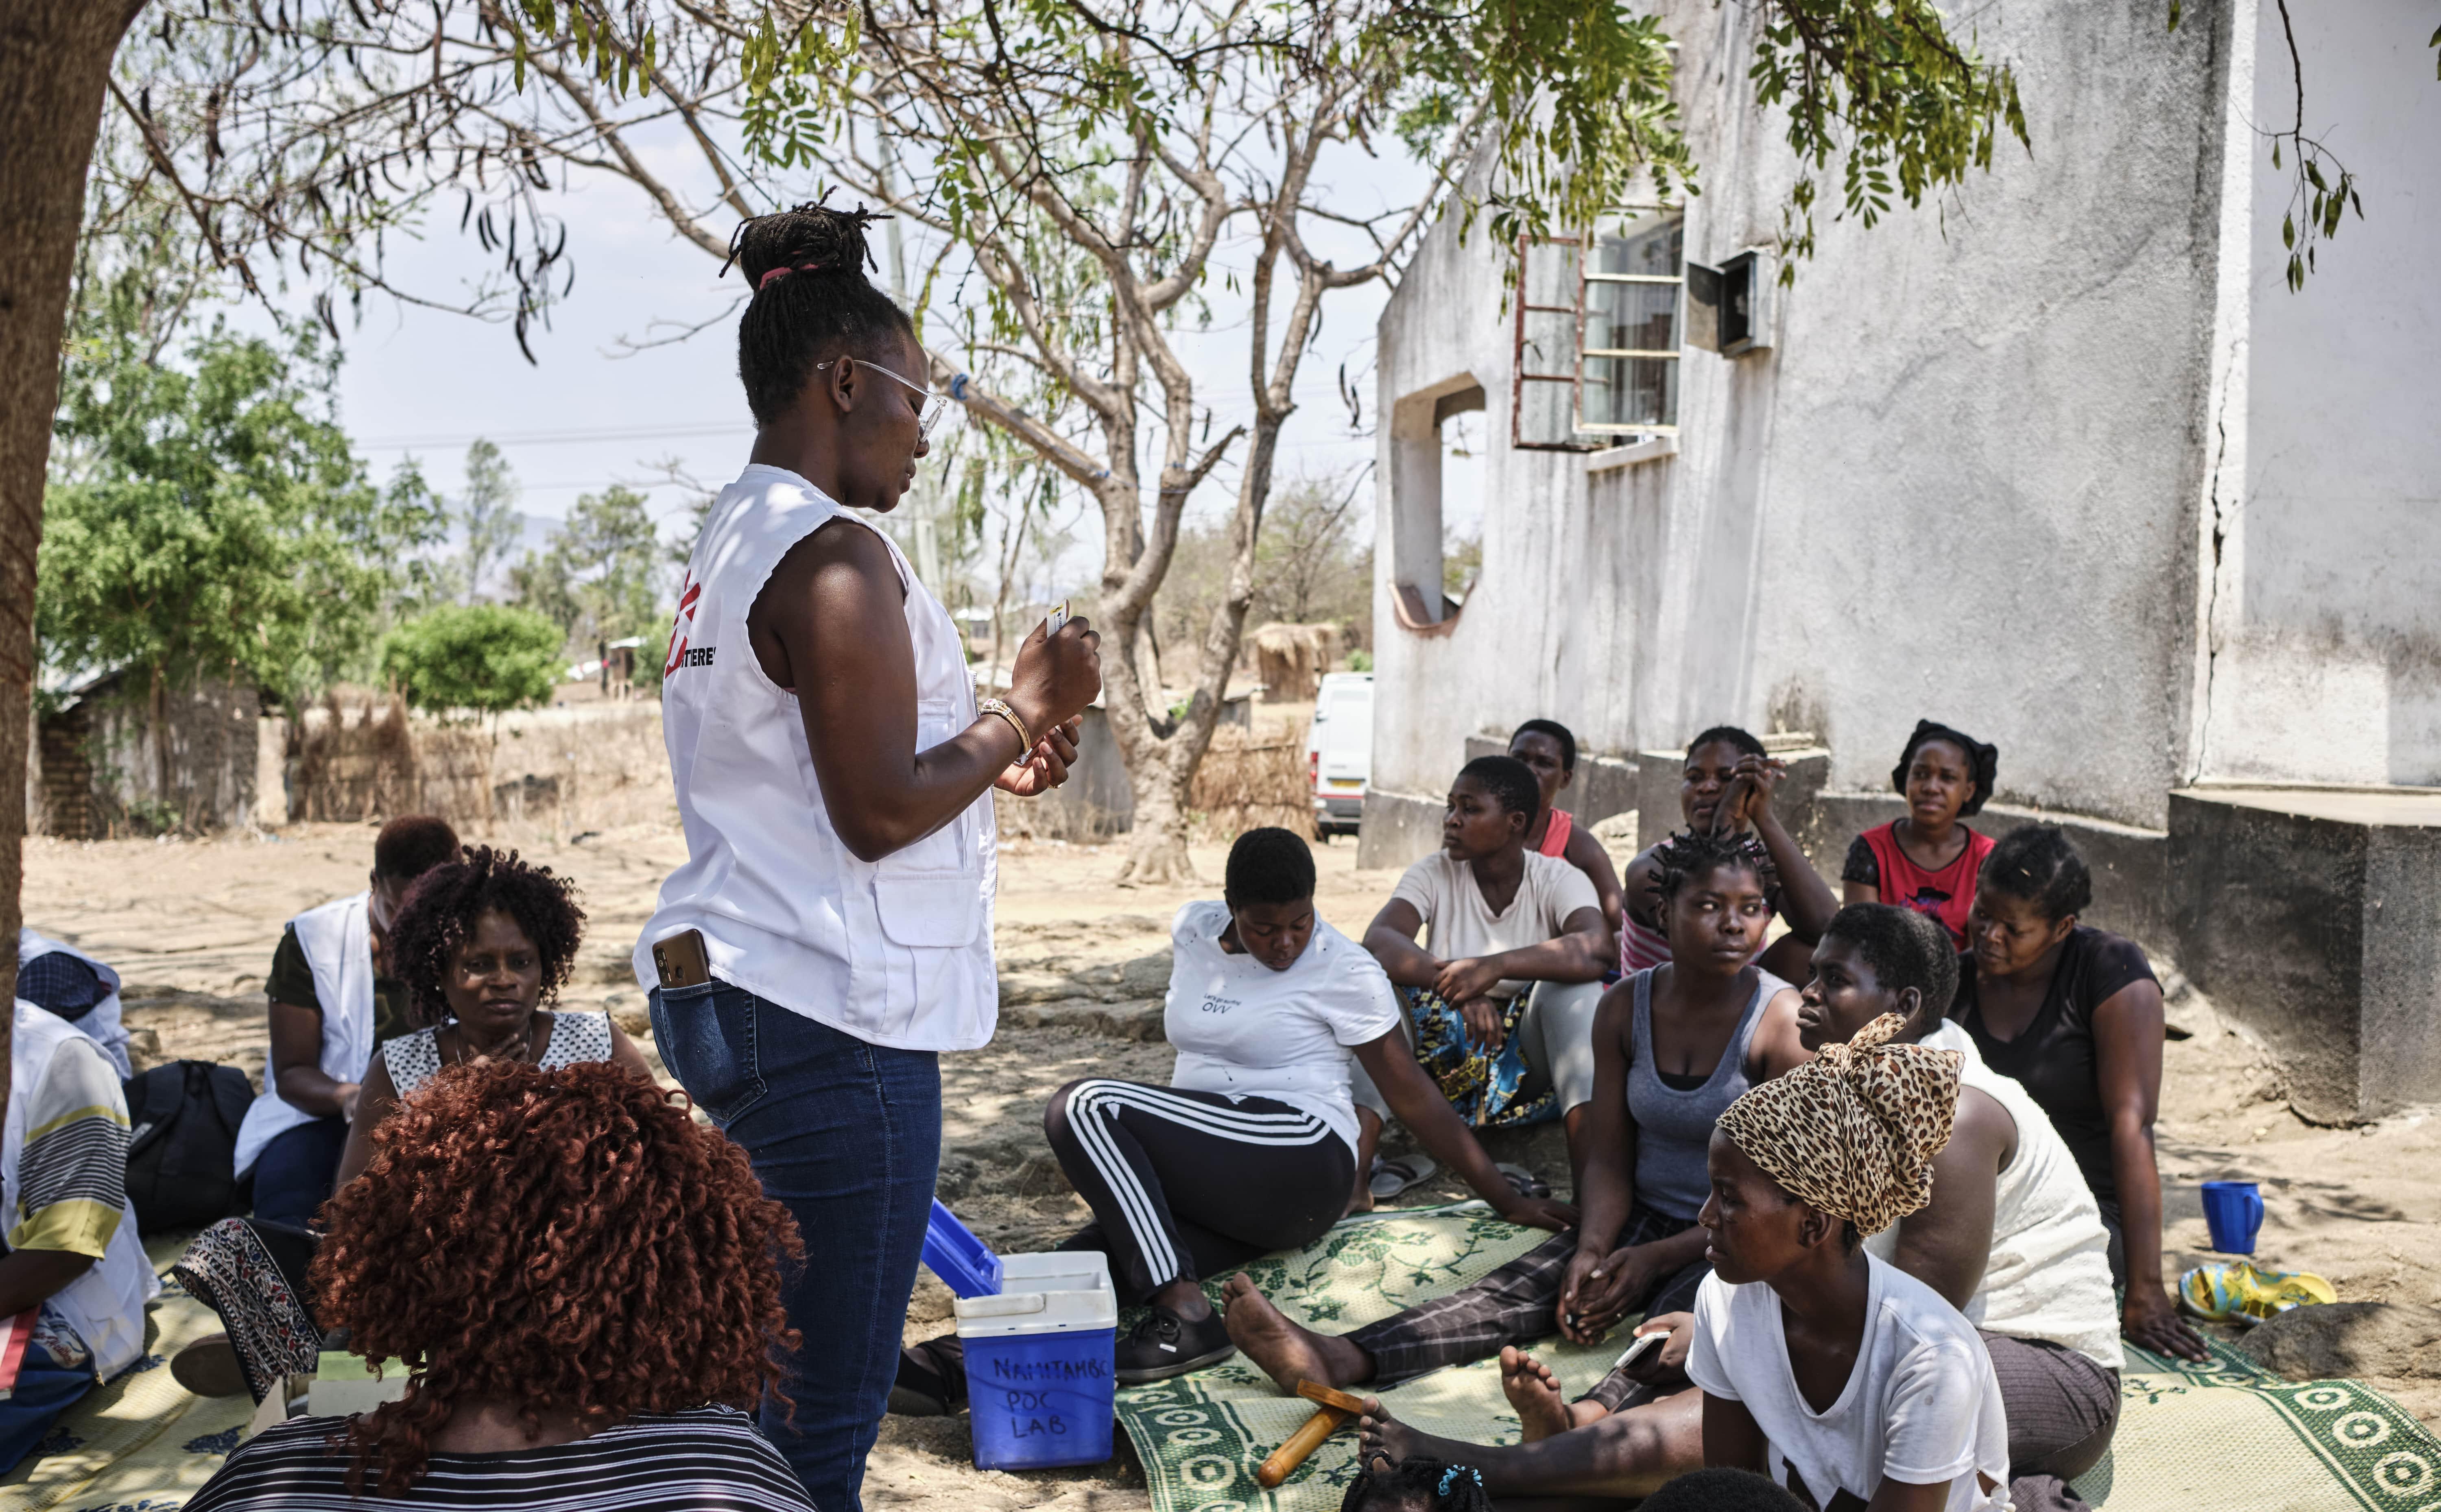 Sex Workers in Malawi: Jacqueline Zulu, MSF's health promotion officer, teaches sex workers how to perform a human papillomavirus self-test. Malawi has the highest rate of cervical cancer in the world, accounting 37 per cent of new cancer cases among women in the country. Nearly all cases of cervical cancer can be attributed to HPV infection.